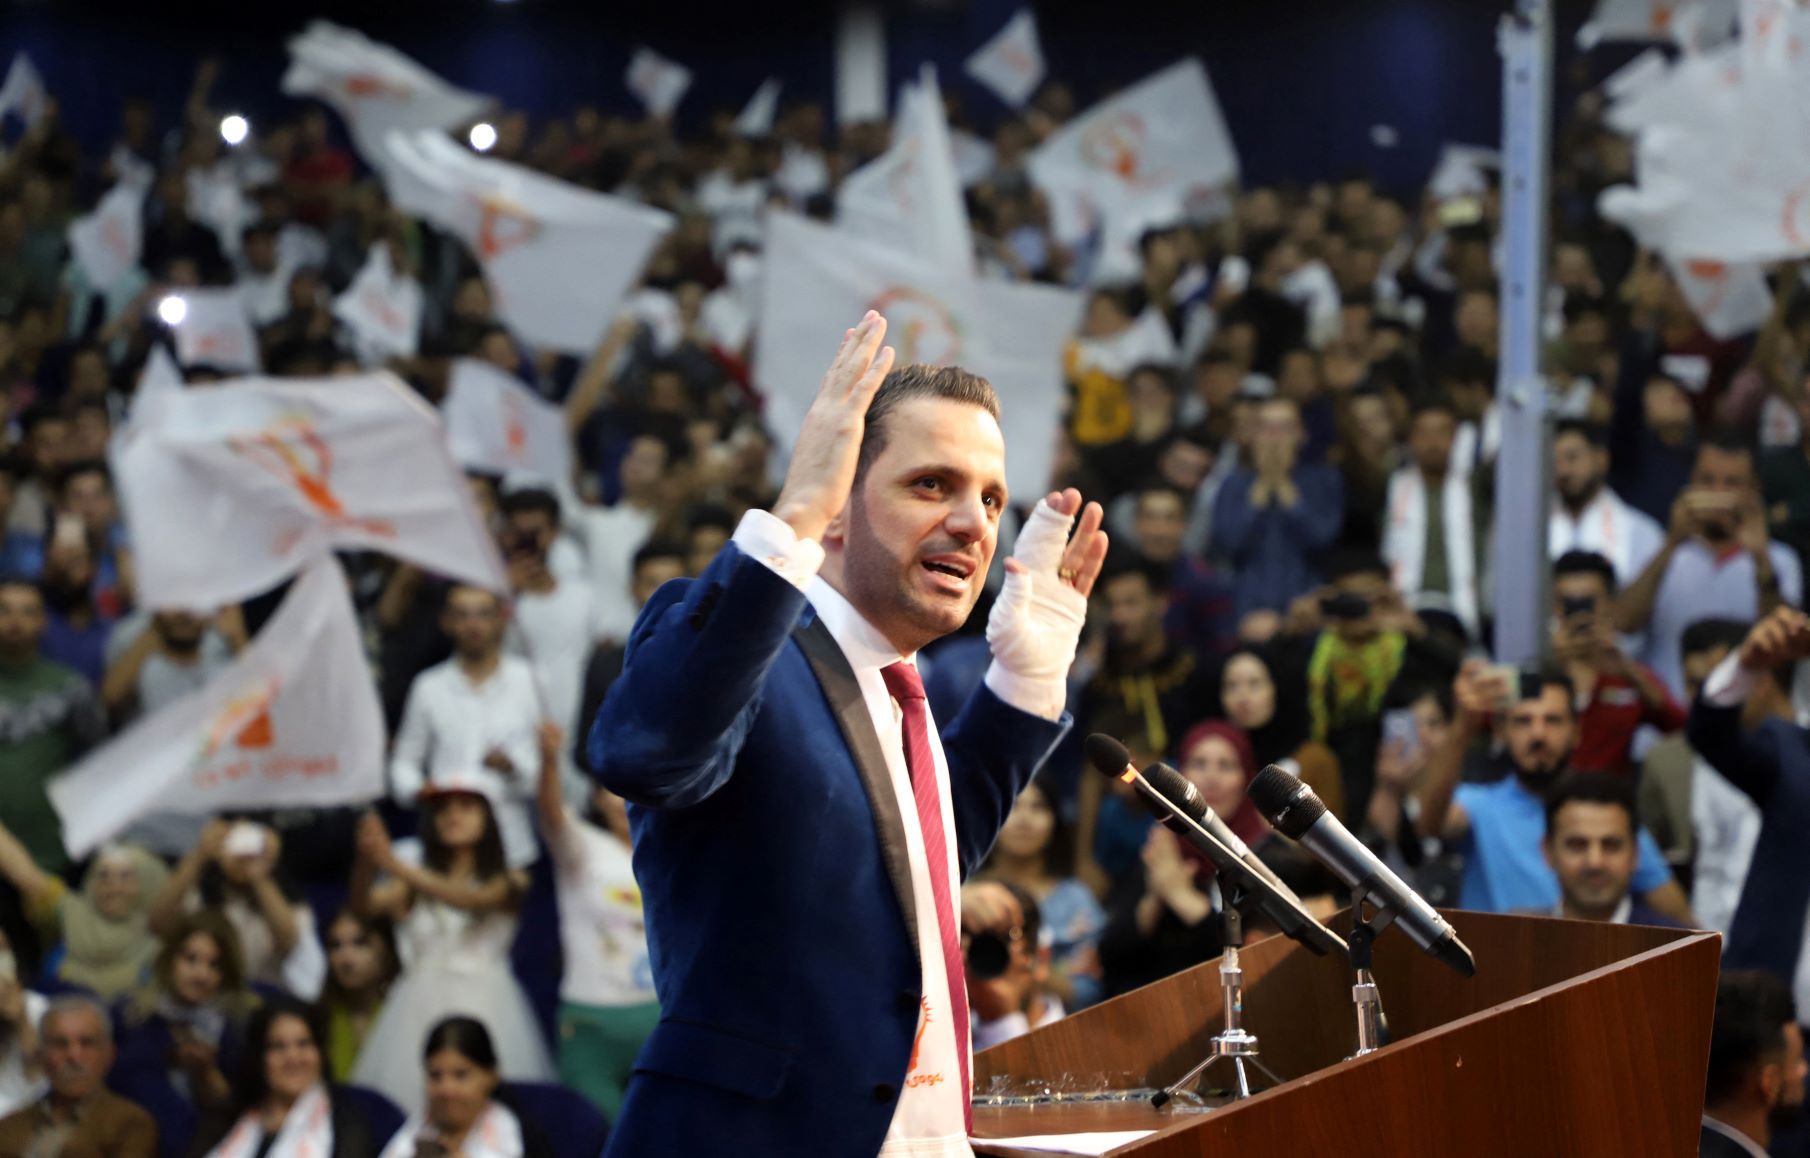 Shaswar Abdulwahid, the owner of Nalia Media Corporation and President of Newey Nwe (New Generation) Political Movement, addresses supporters (AFP)